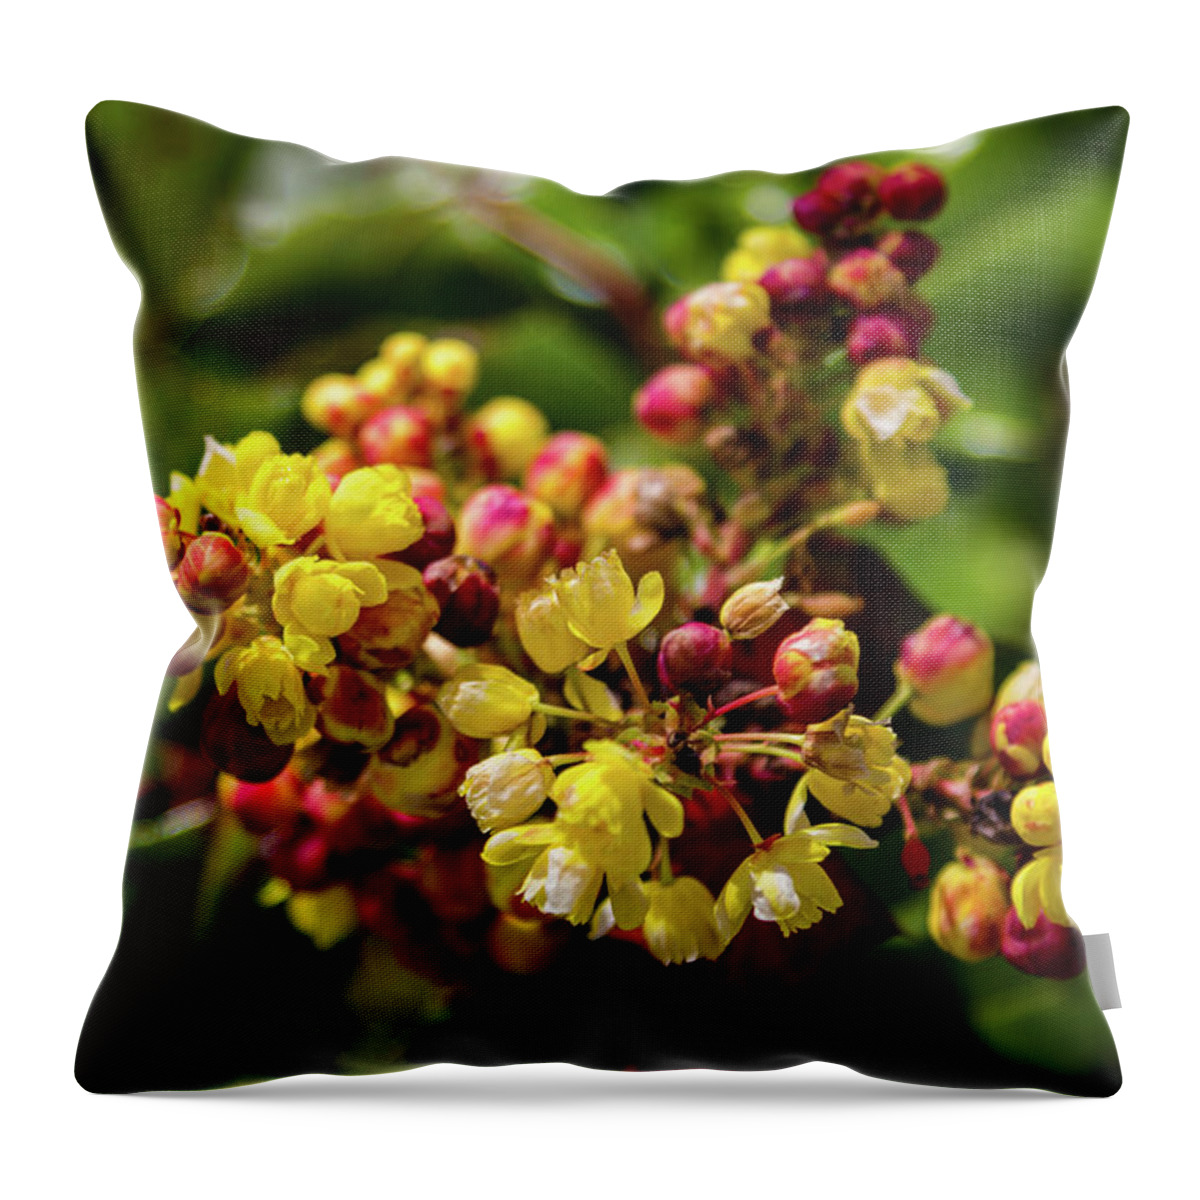 Flower Throw Pillow featuring the photograph Oregon Grape Holly Flowers by Aashish Vaidya